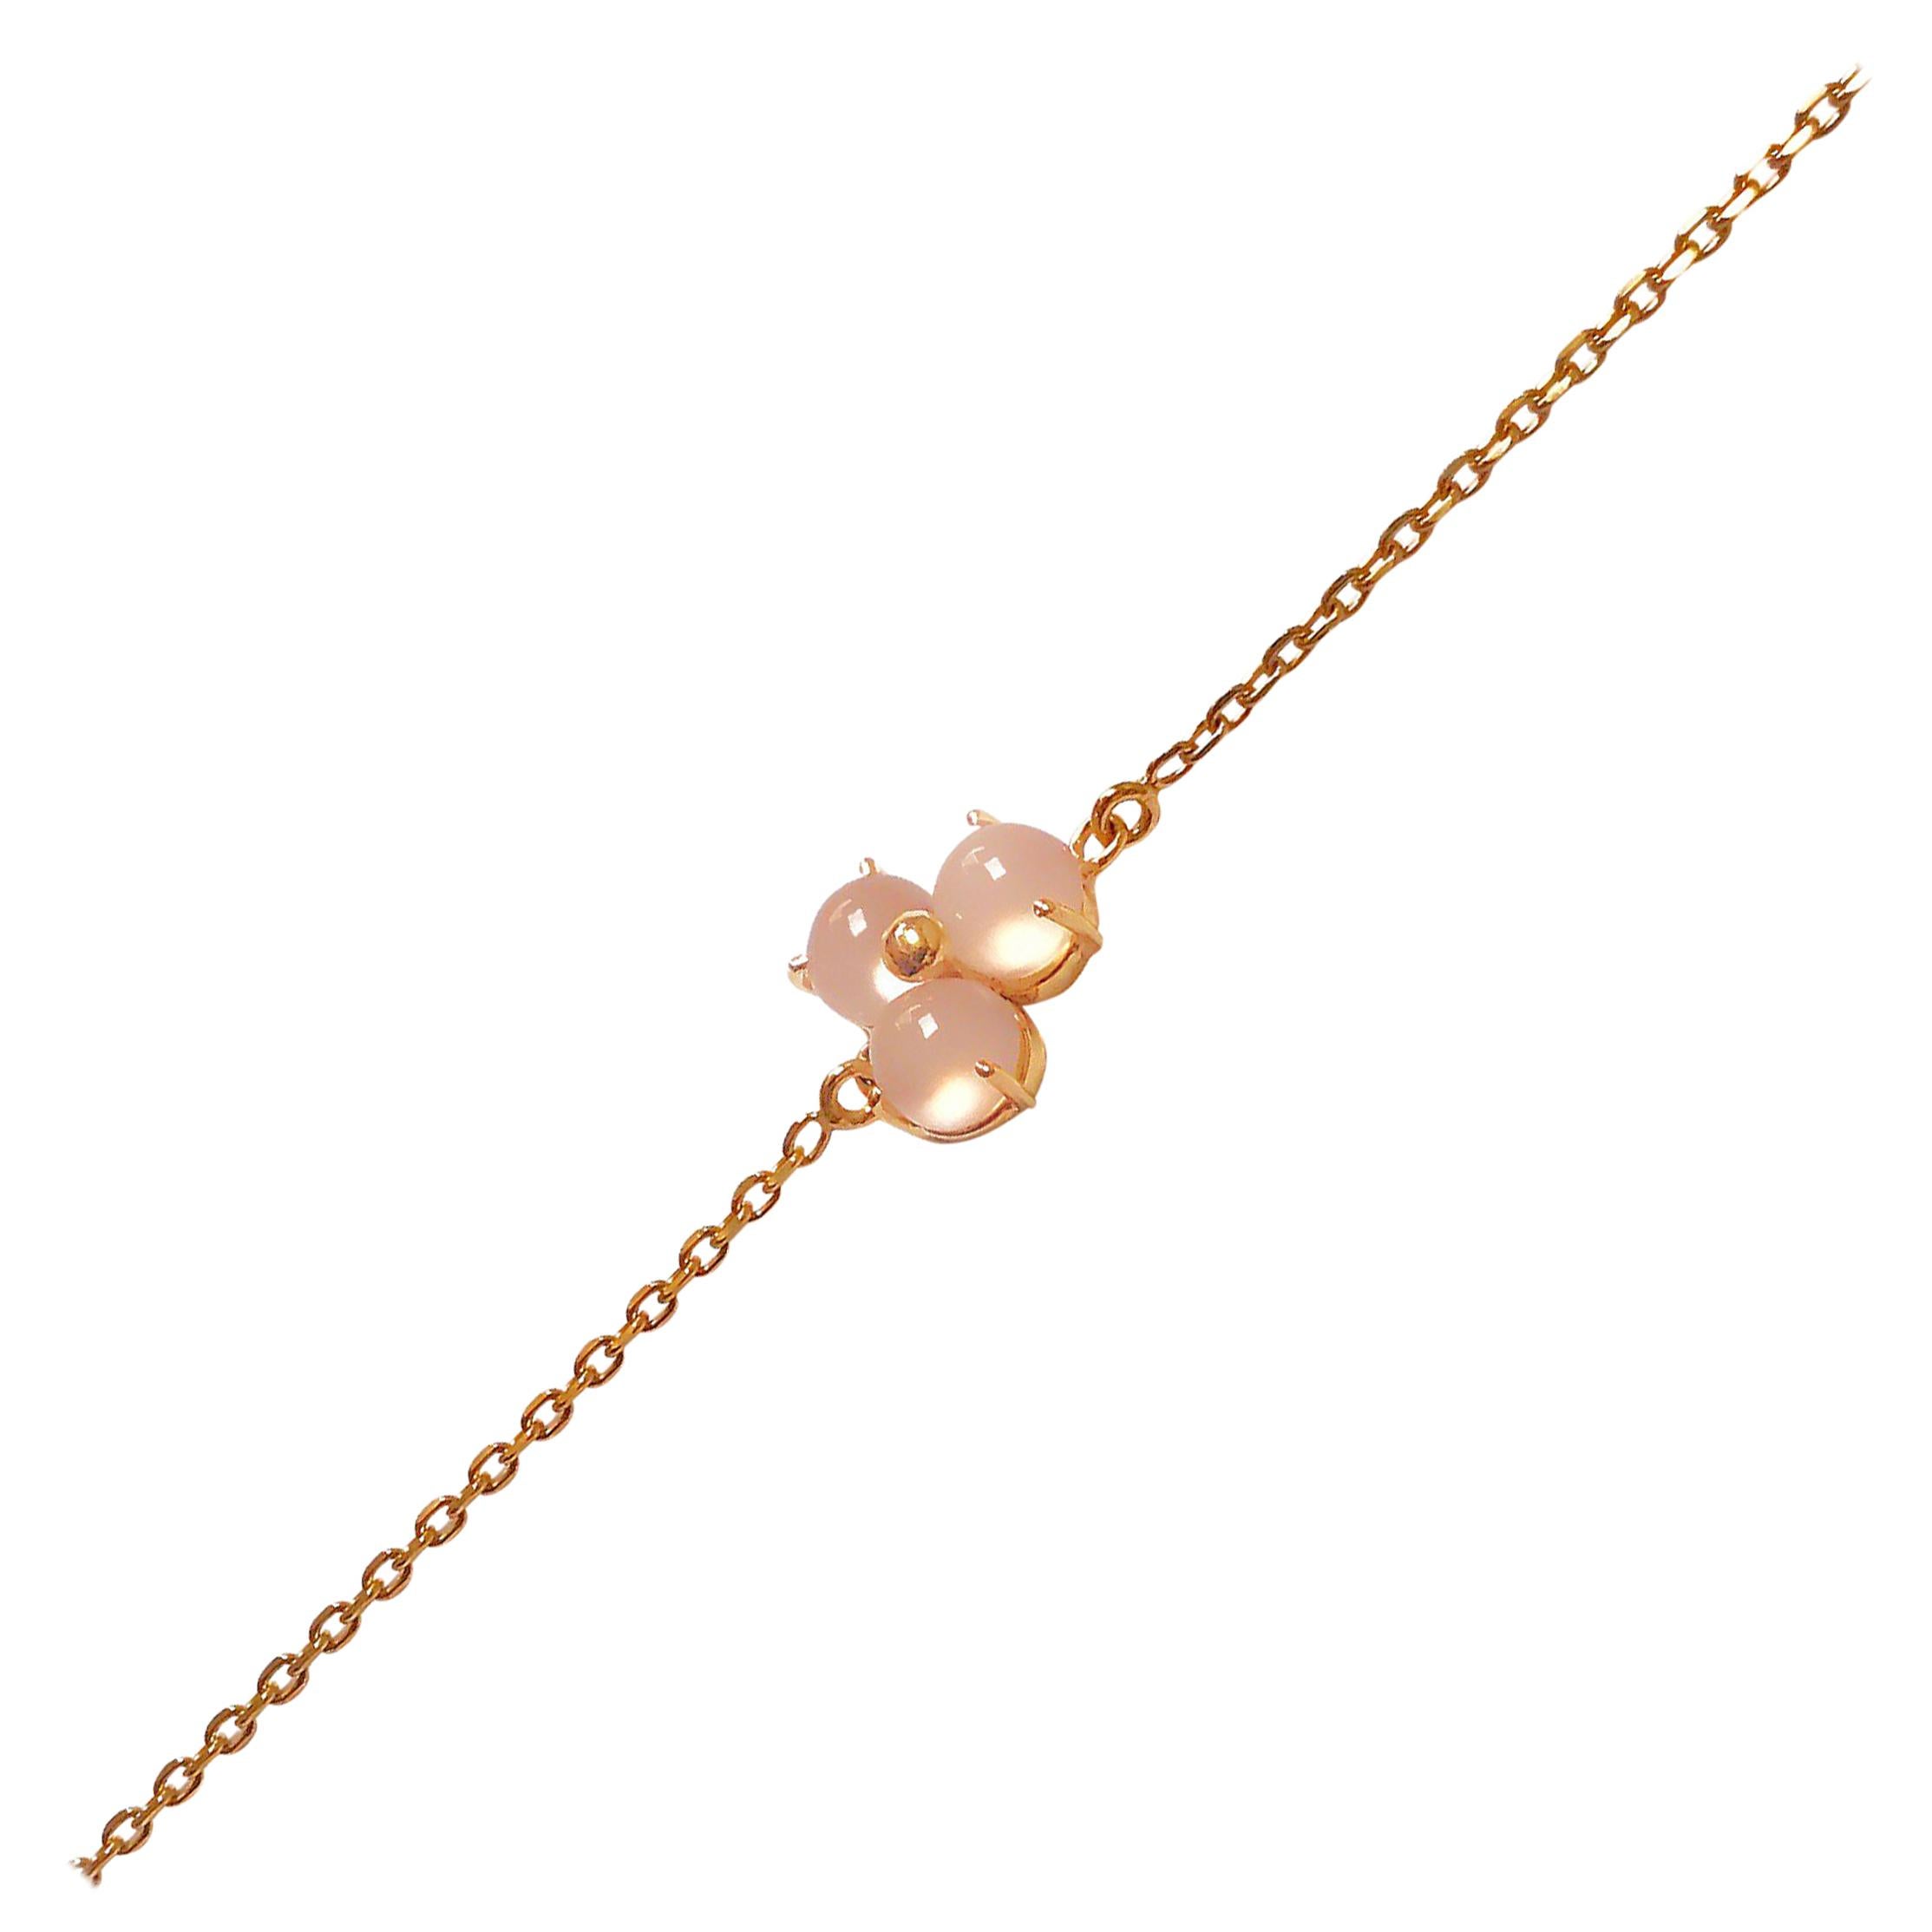 Handmade bracelet with solid yellow gold and pink cabochon cut chalcedony stones.
This bracelet makes a beautiful gift for many different occasions.
Hallmark: London Goldsmiths' Company - Assay Office